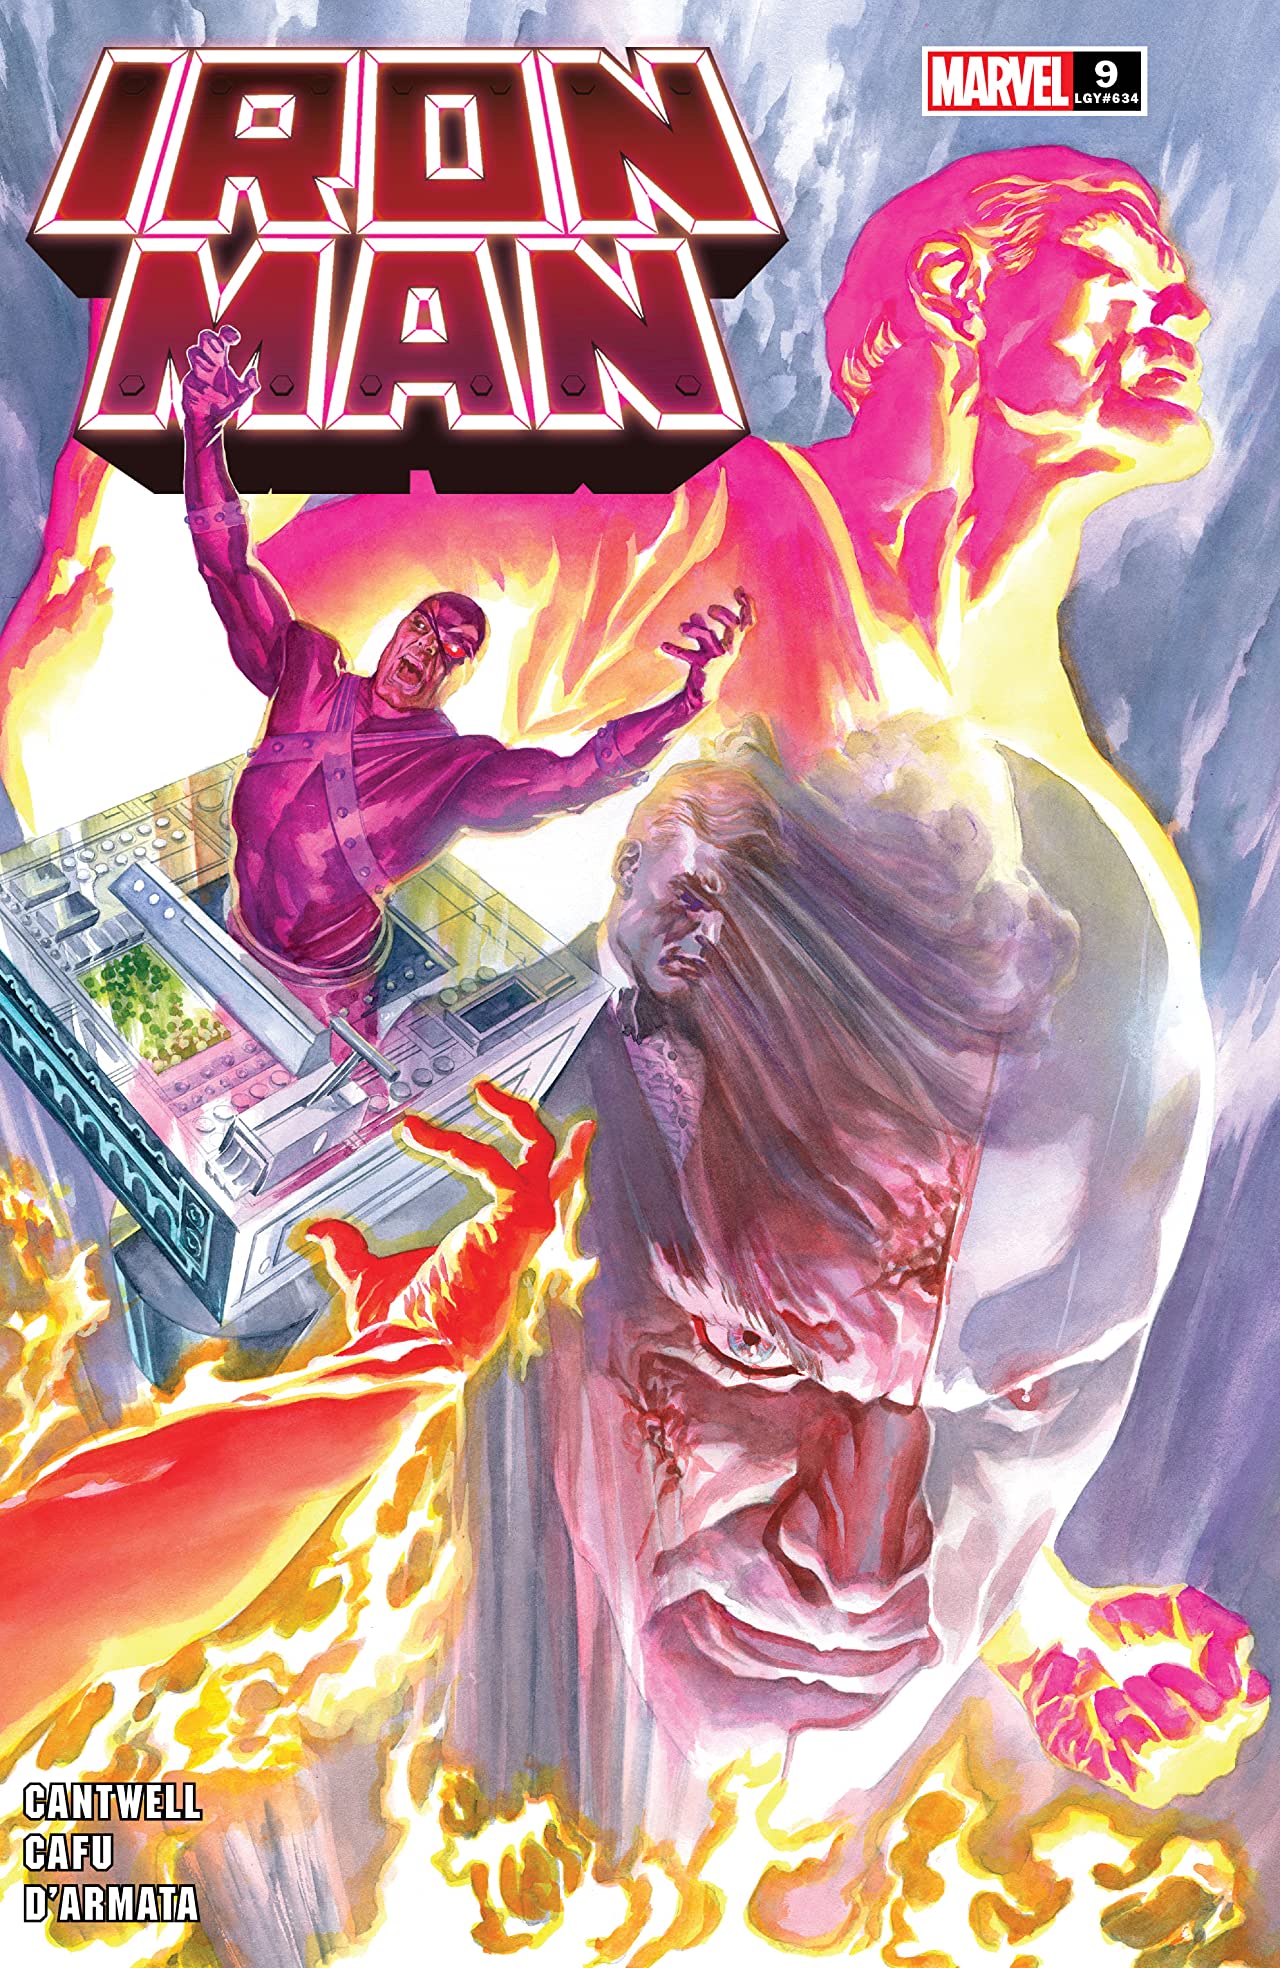 Marvel Preview: Iron Man #9